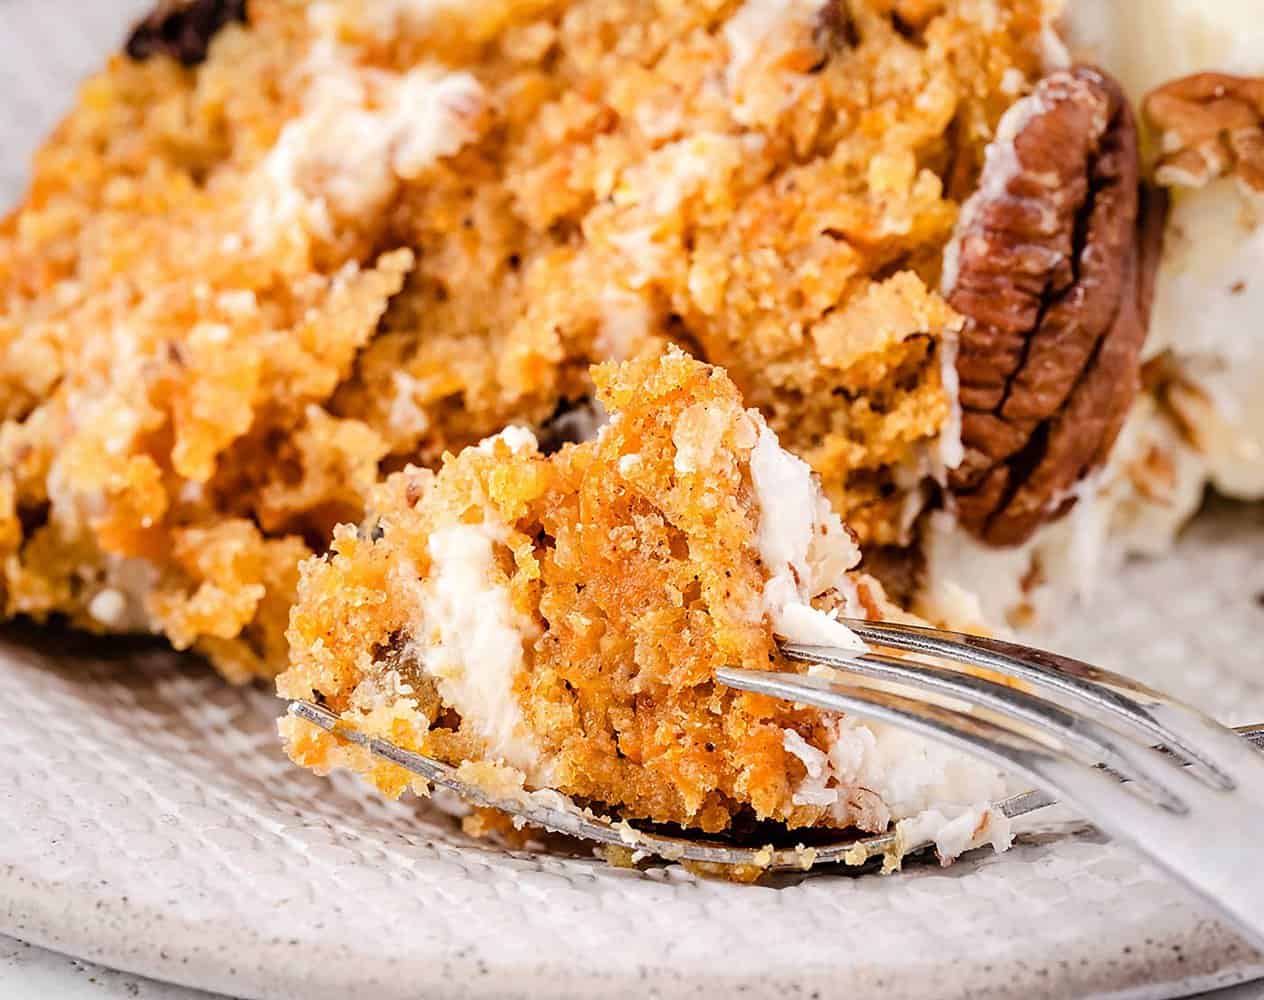 A piece of carrot cake on the fork.